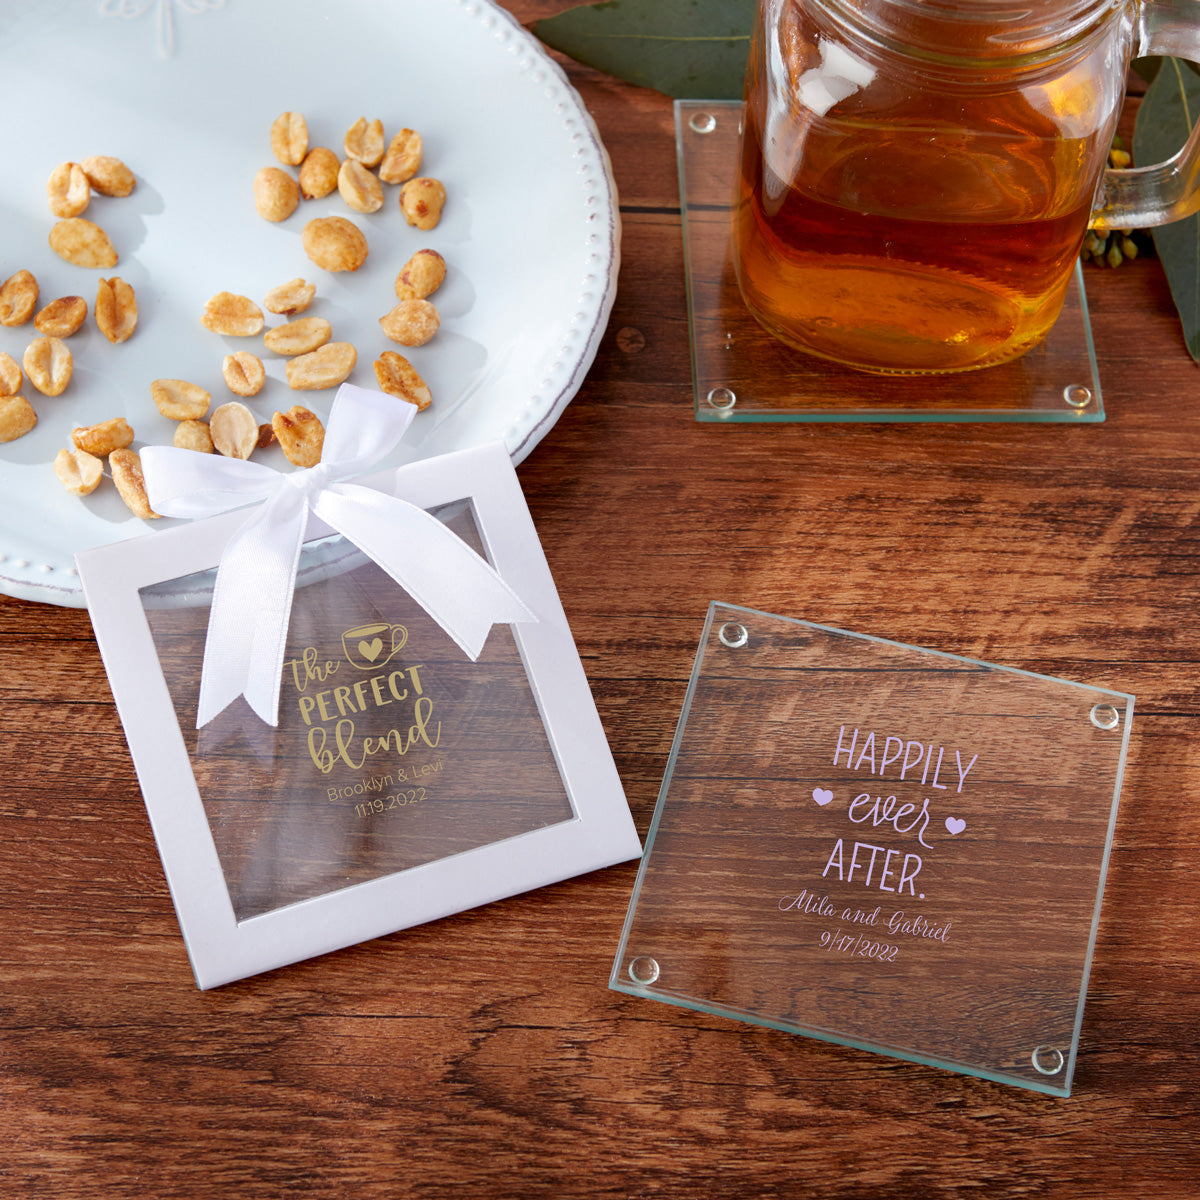 Personalized Glass Coaster (Set of 12) - Main Image6 | My Wedding Favors